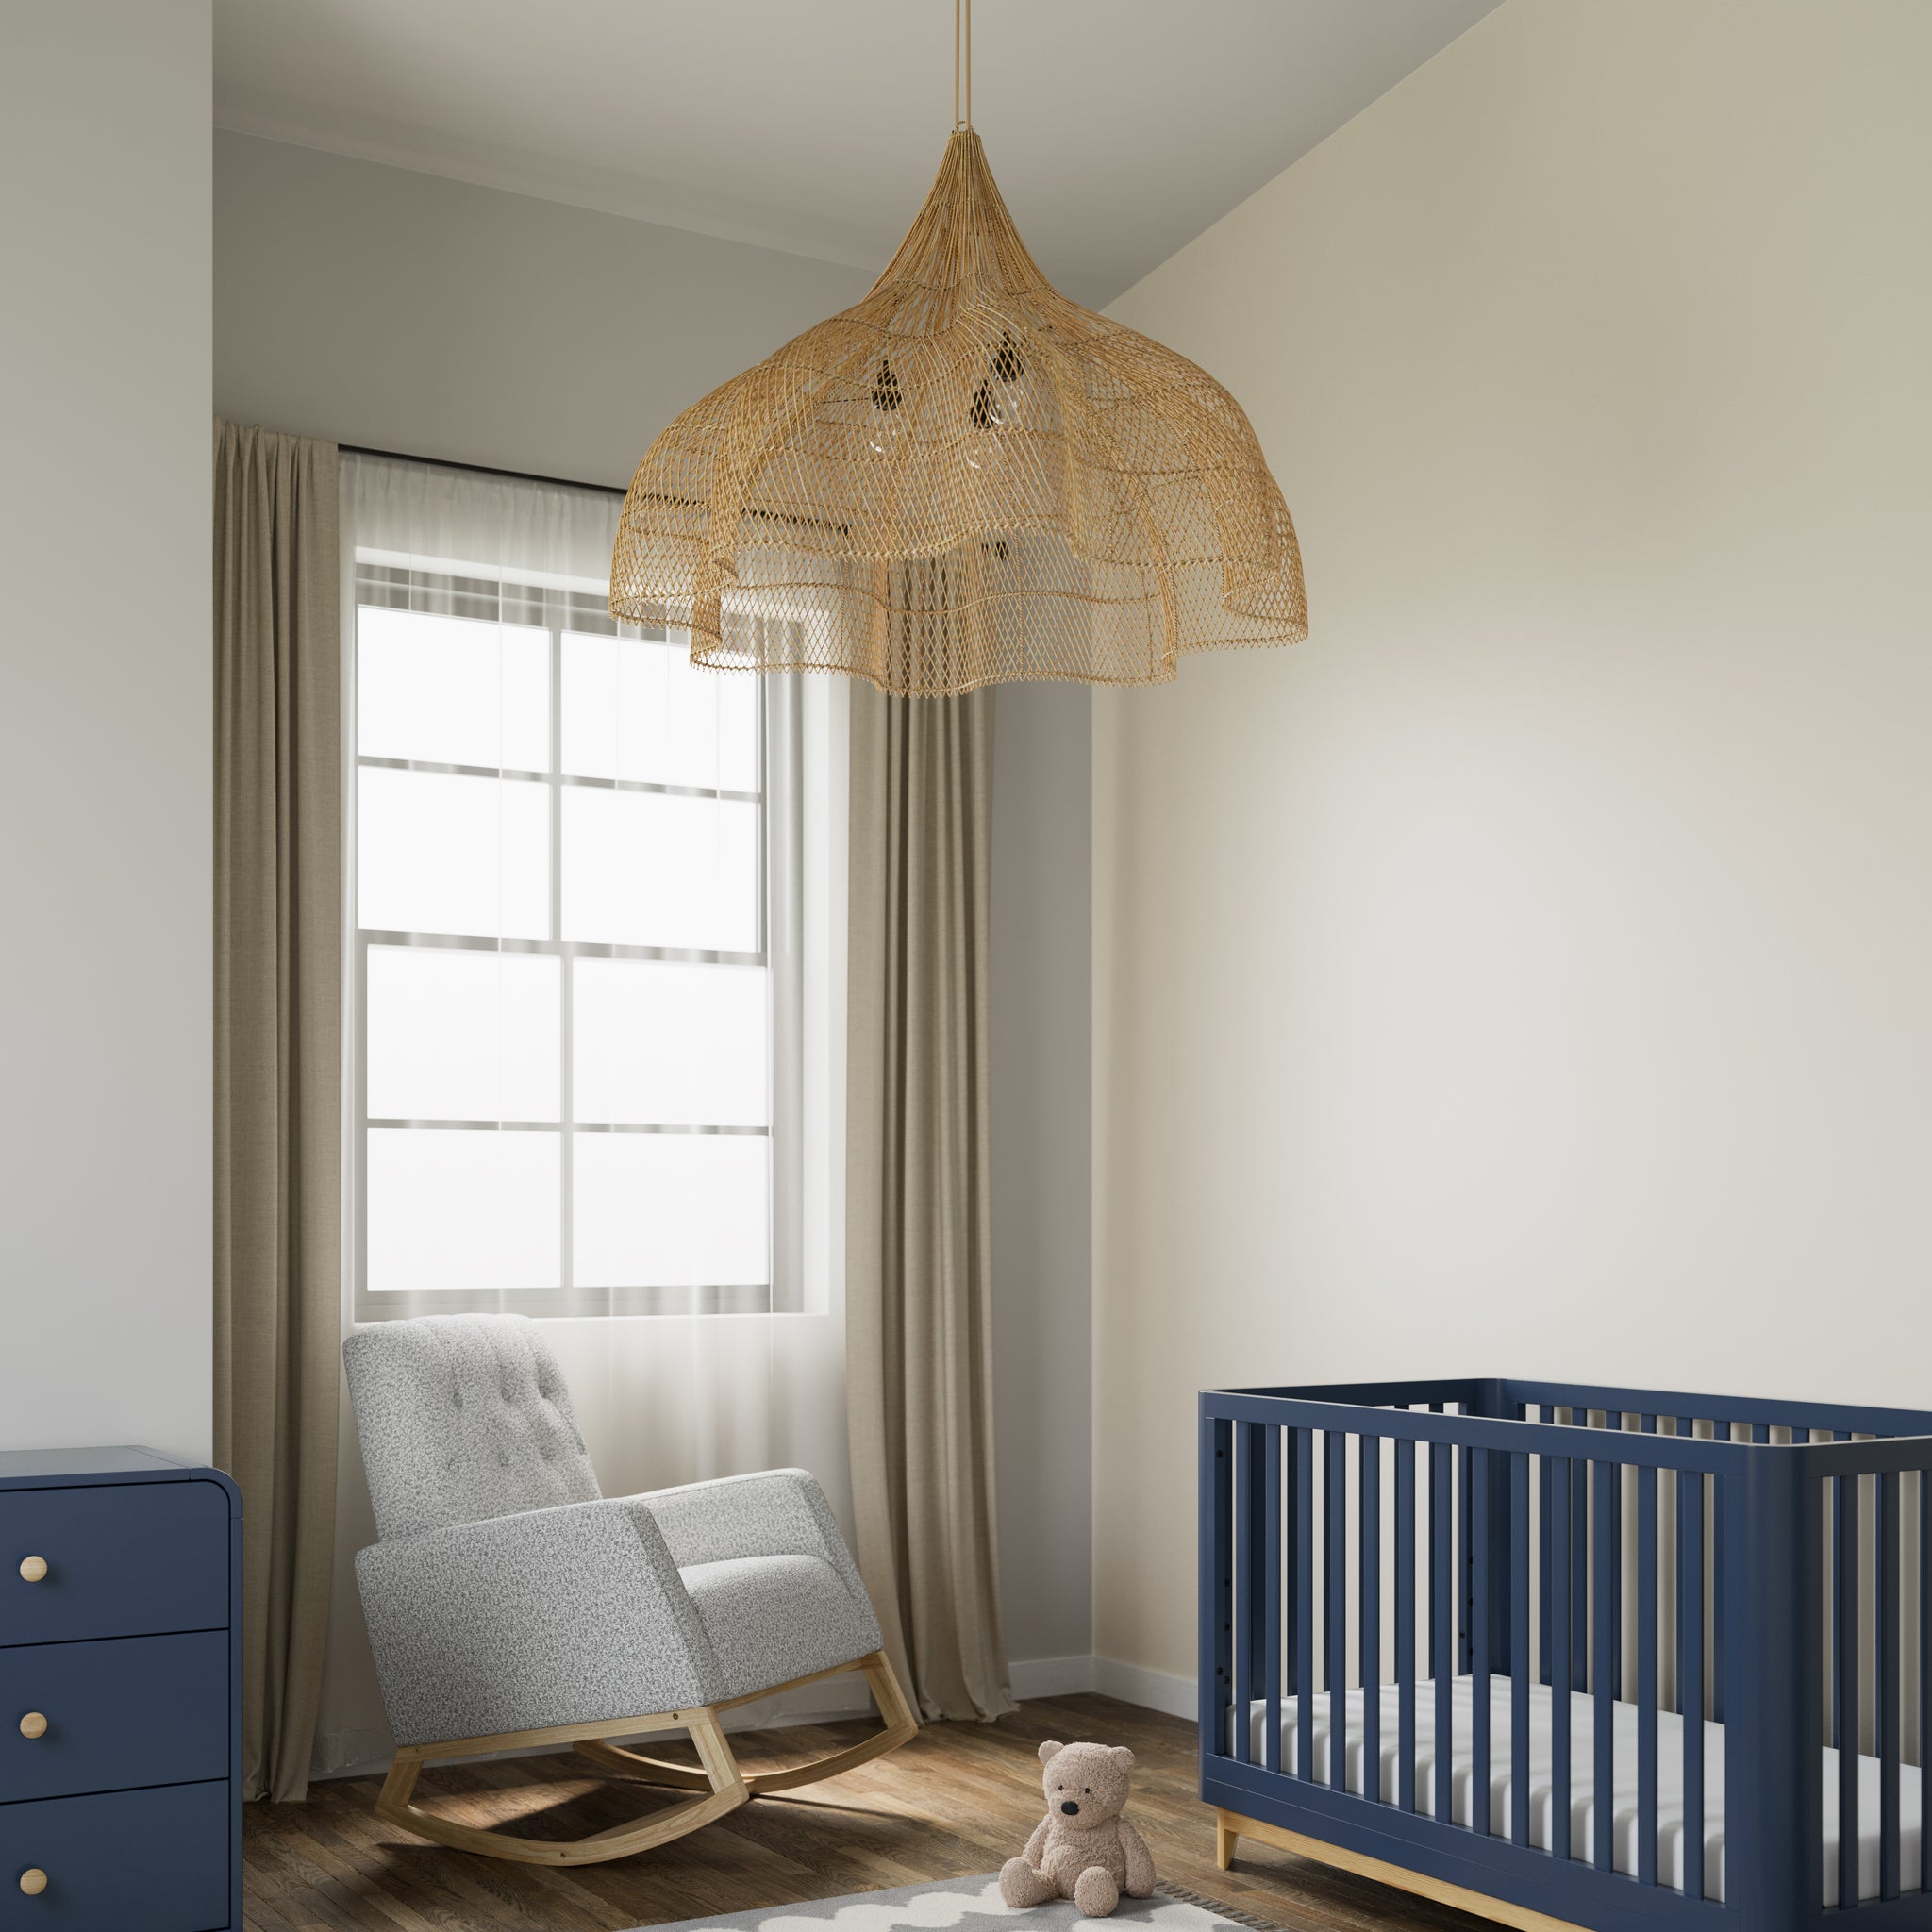 Rocker chair with natural wood base and salt-and-pepper boucle fabric, accompanied by a blue crib with a natural base and a matching blue dresser featuring driftwood knobs, all in a nursery setting.